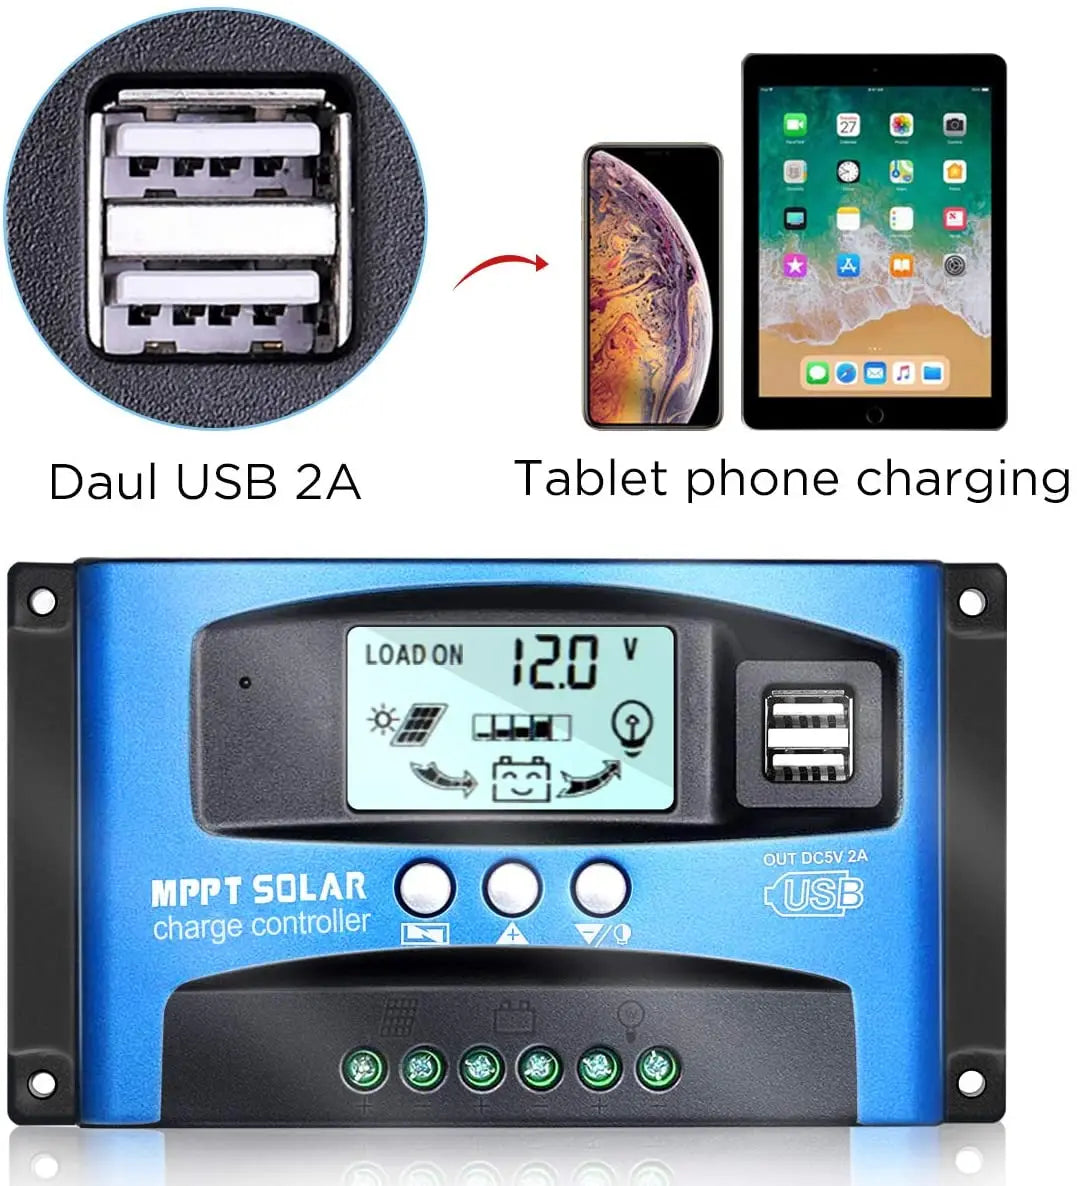 Dual USB ports for charging tablets and phones simultaneously with 2A output.